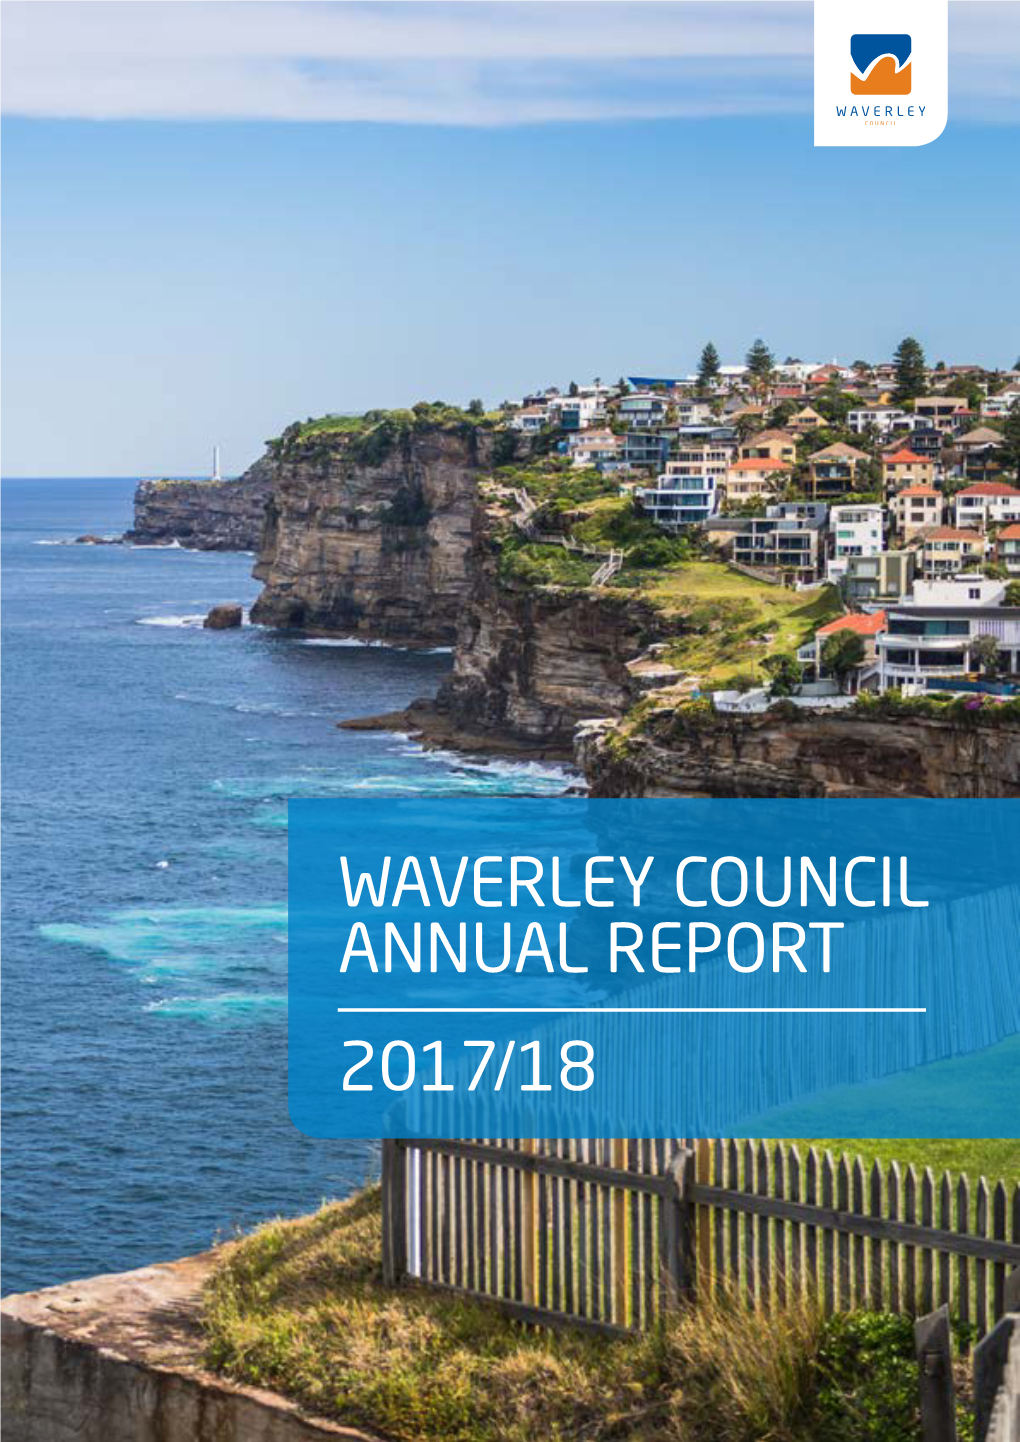 2017/18 Waverley Council Annual Report